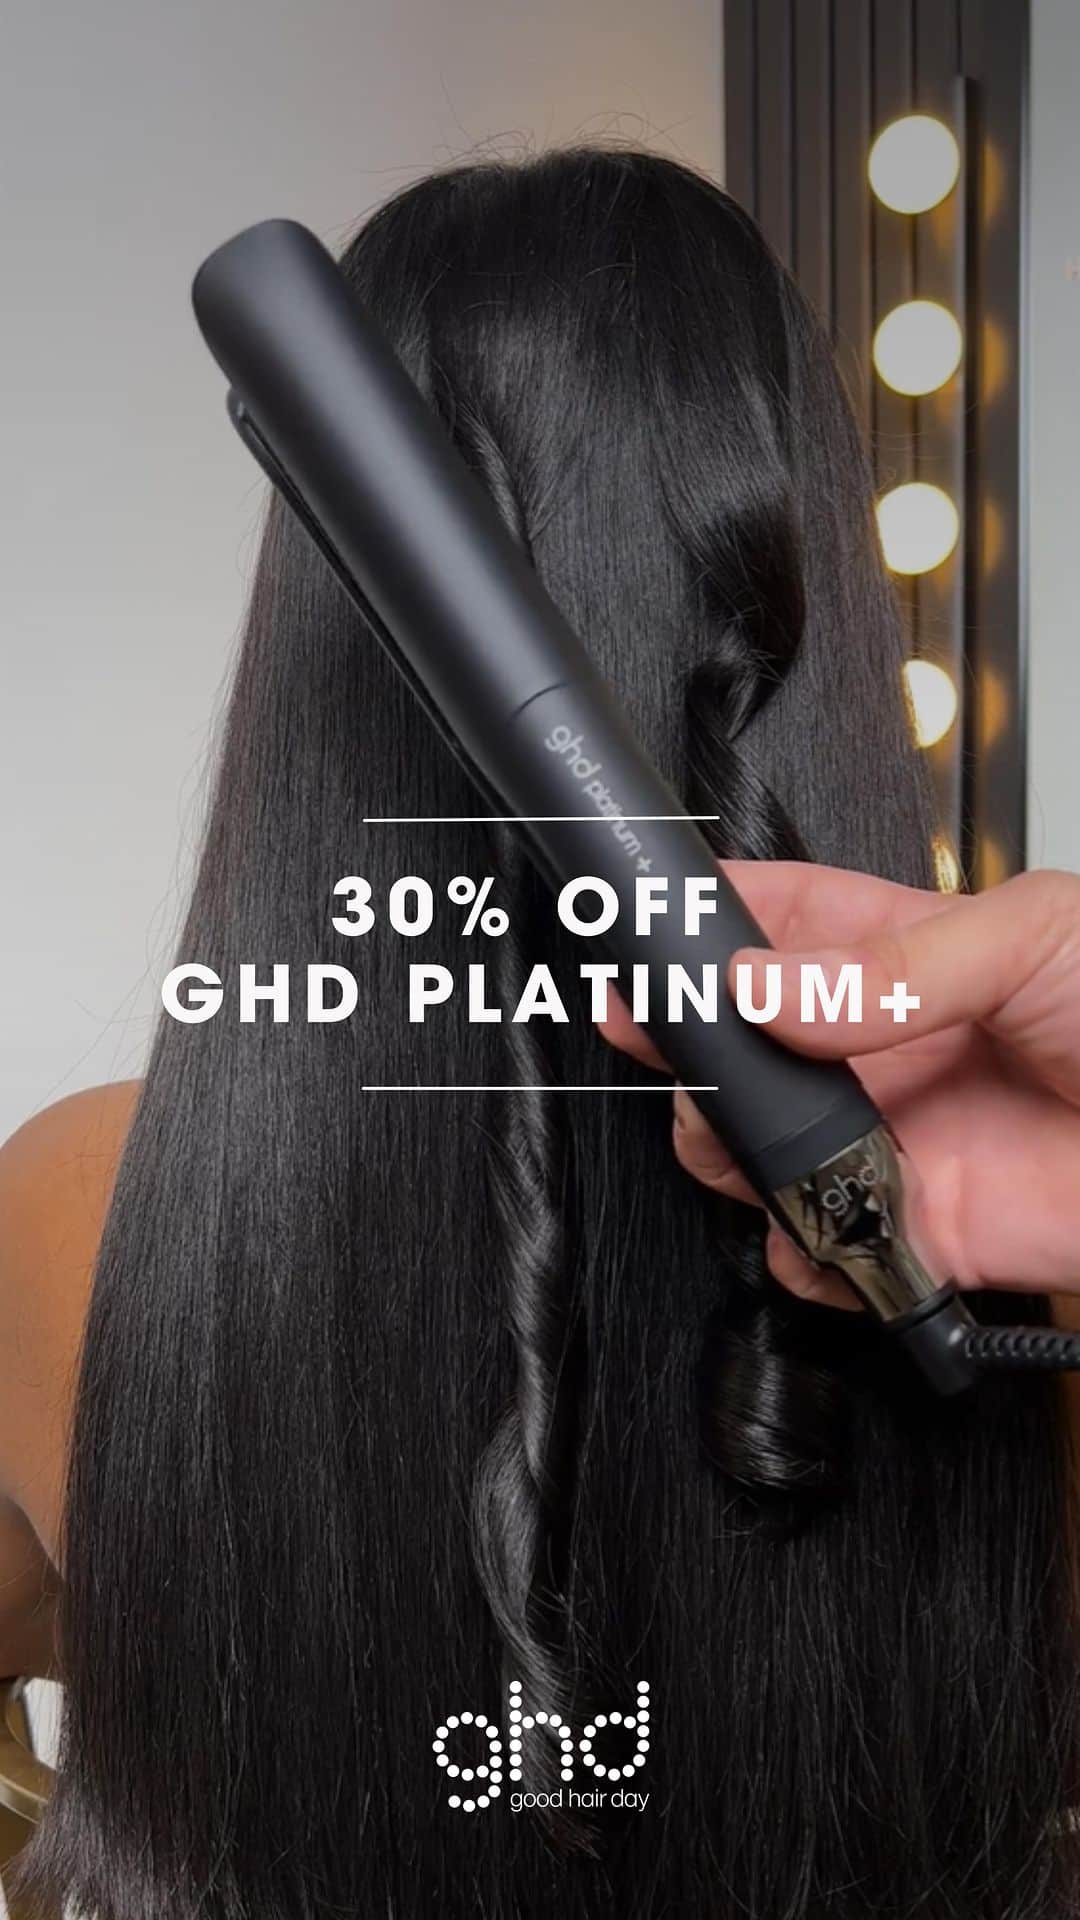 ghd hairのインスタグラム：「NEW OFFER UNLOCKED🔓 PLATINUM+ IS NOW 30% OFF! 📢 Be quick, this offer won’t last long… 🏃‍♀️🛍️  Receive a complimentary paddle with purchase when using code GHDXBF at checkout today 🪮 (FYI: We have tool personalisation across selected tools too!) ✍️   #ghd #ghdhair #blackfriday #haircaredeals #blackfriday23 #blackfridayhaircare」